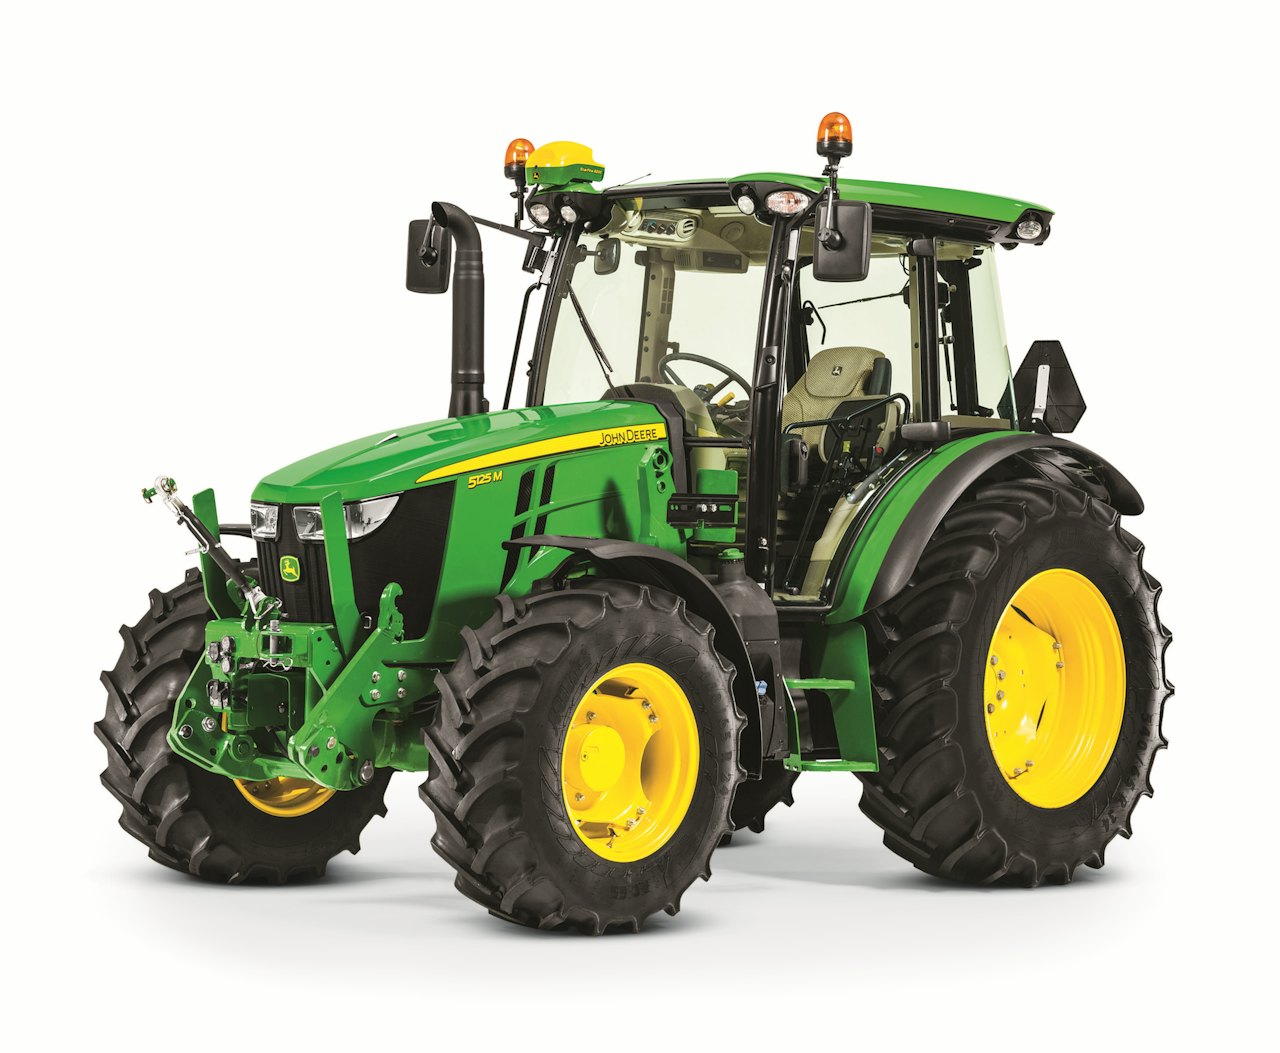 John Deere Tractors for MY22 Include New Technology and Transmission Options OEM Off-Highway